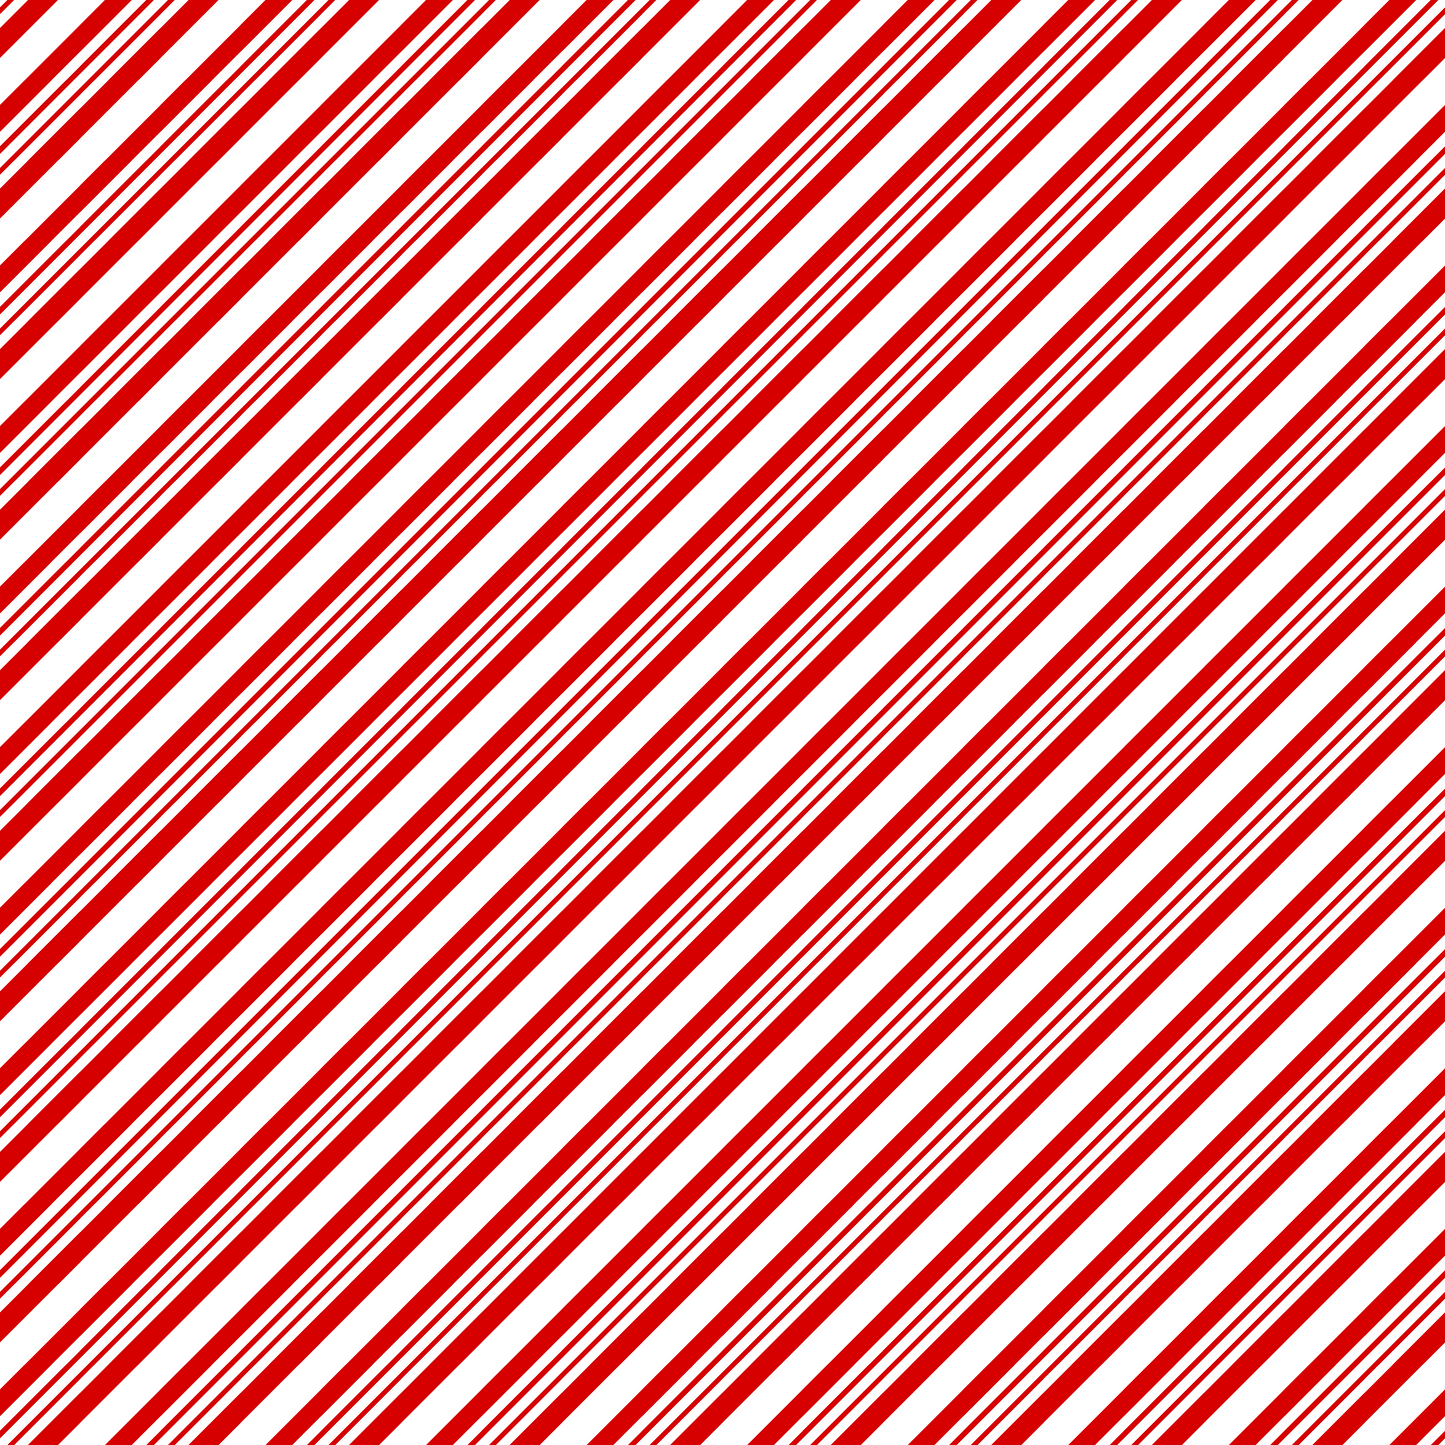 Candy Cane Stripes - Red Stripes 012